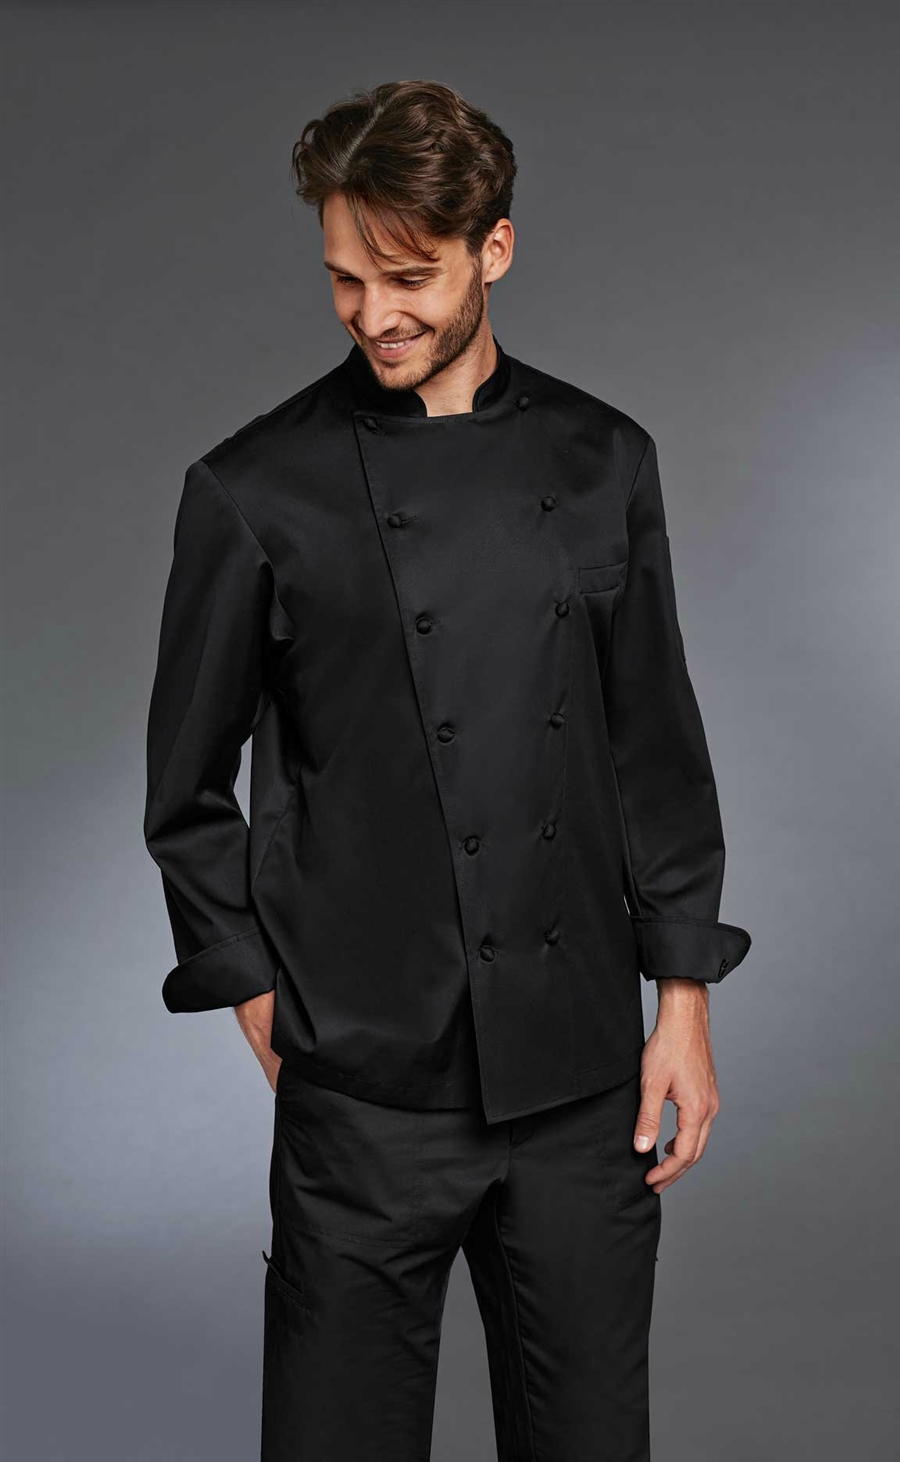 'The Grand Chef' ALLURE Chef Jacket black with Pen Pocket and Breast Pocket in 100% Cotton